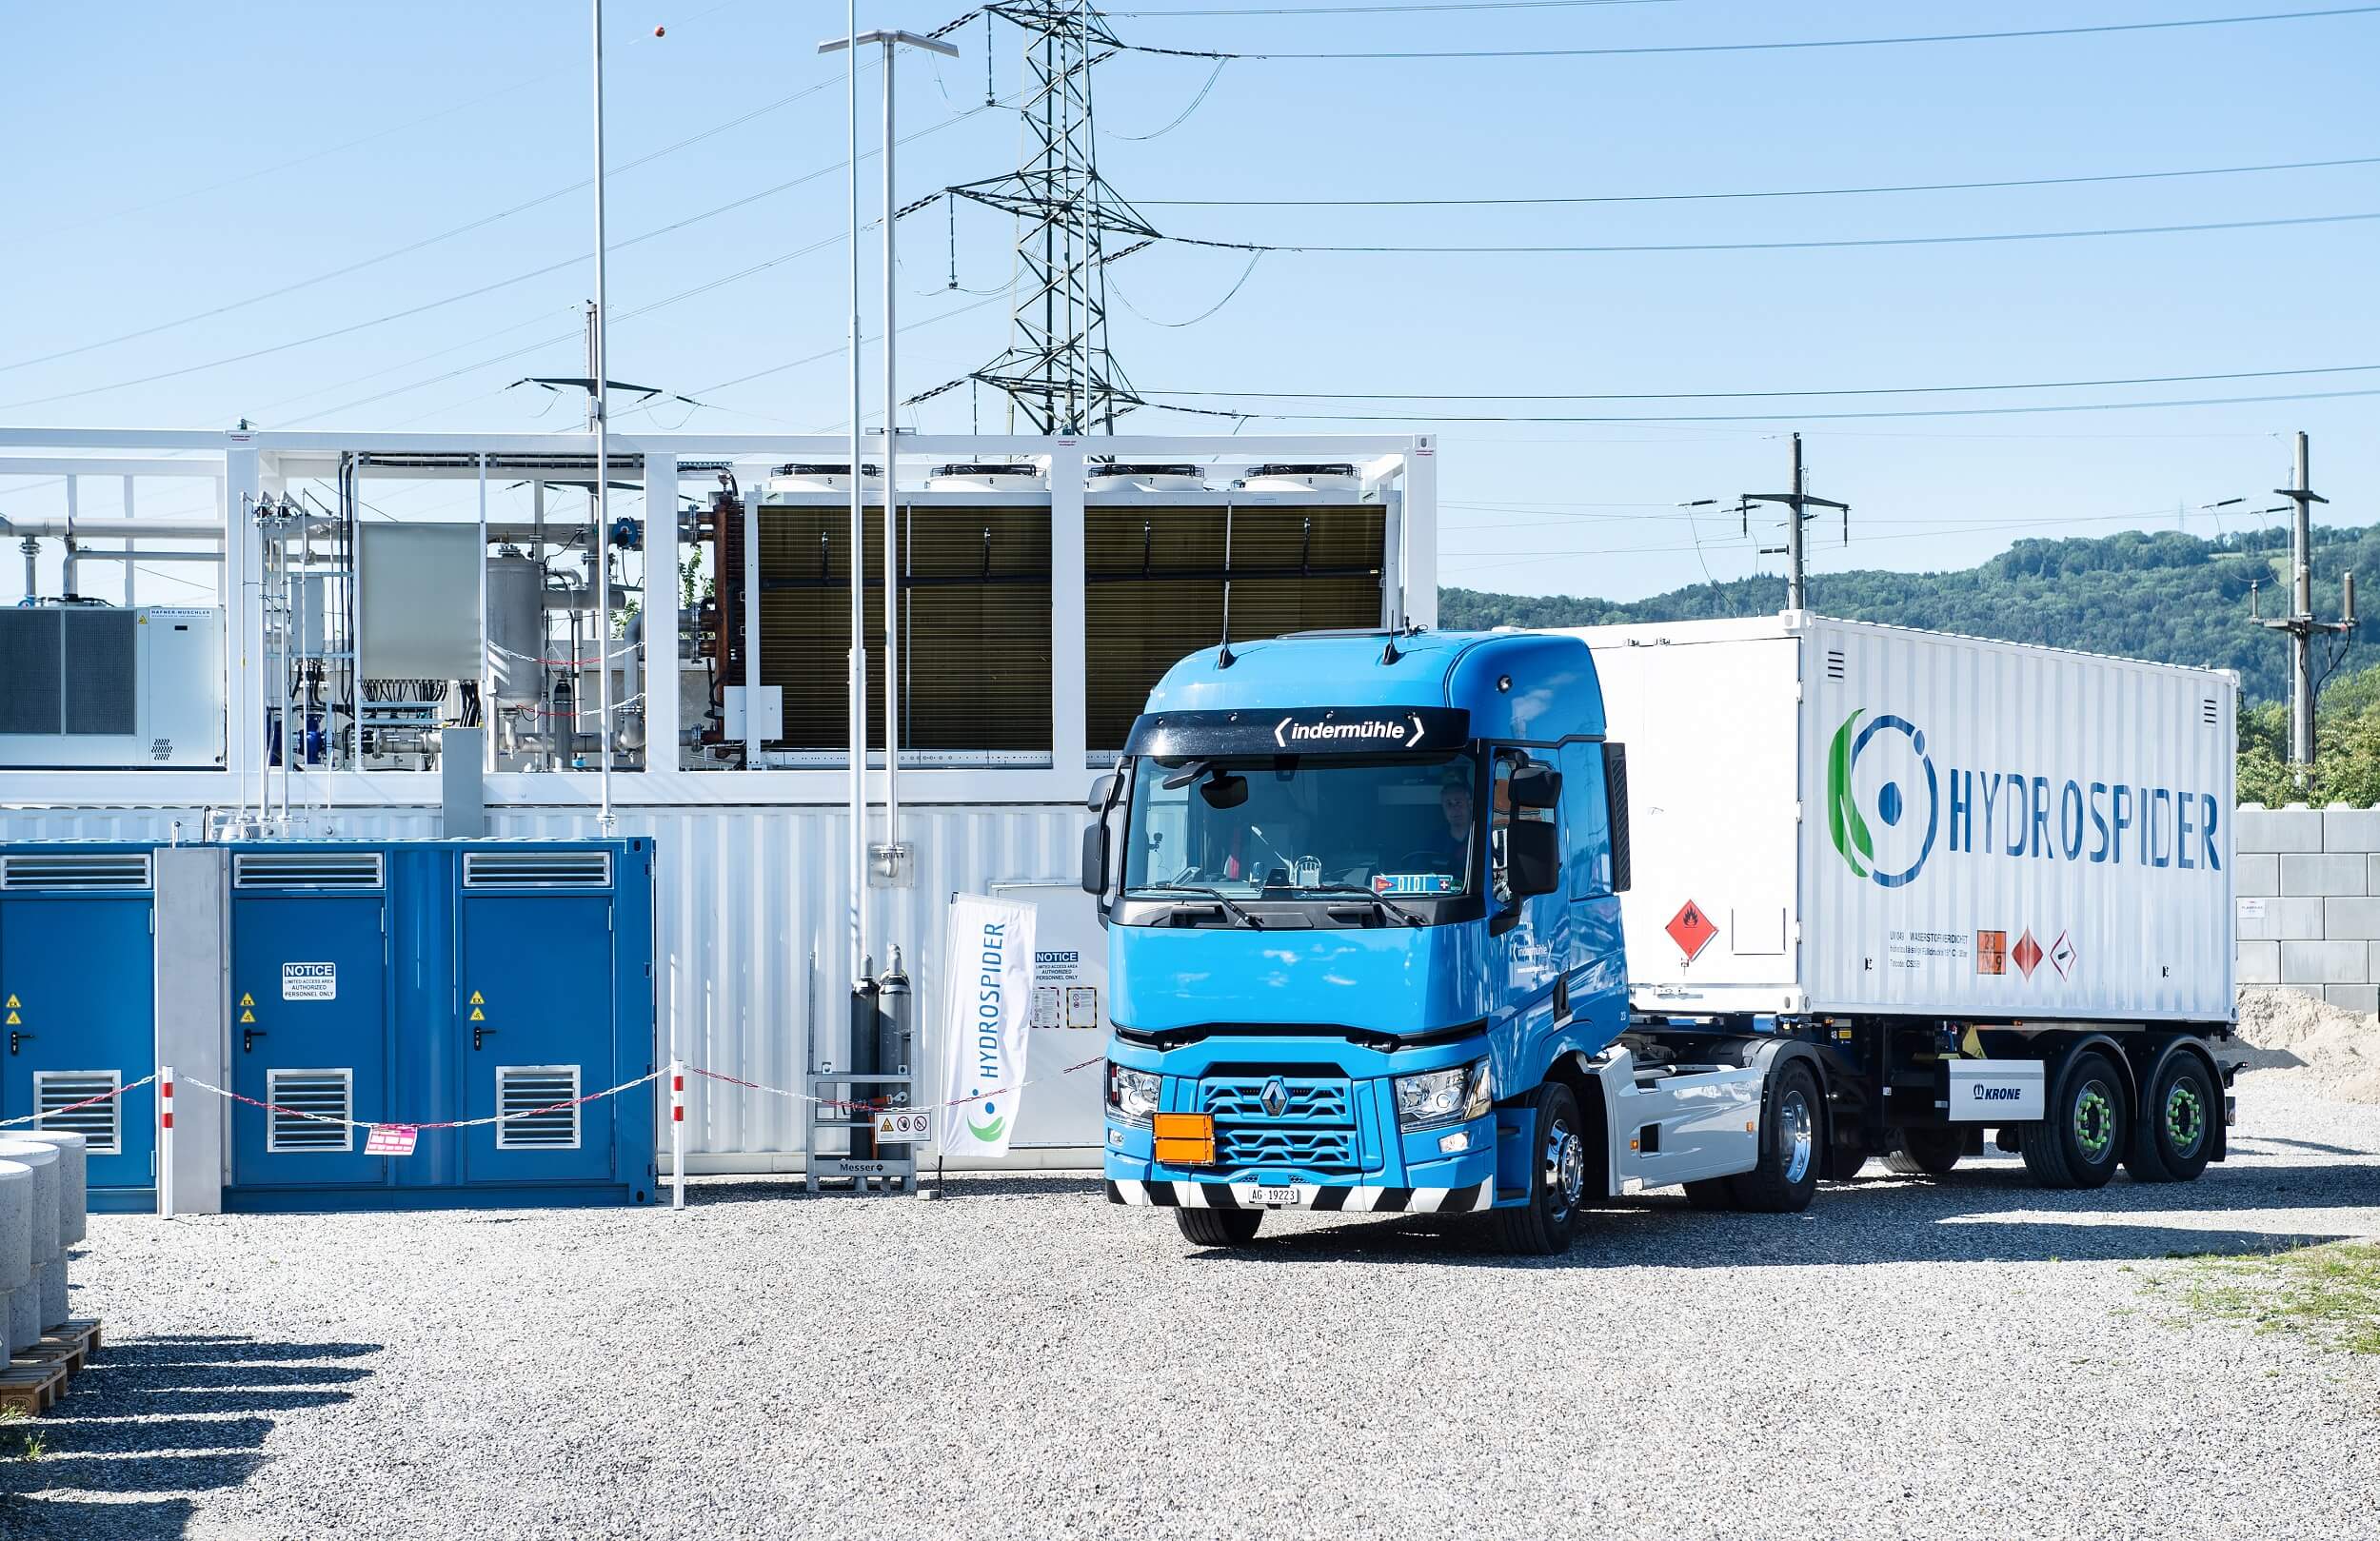 Hydrospider delivers first container of green hydrogen